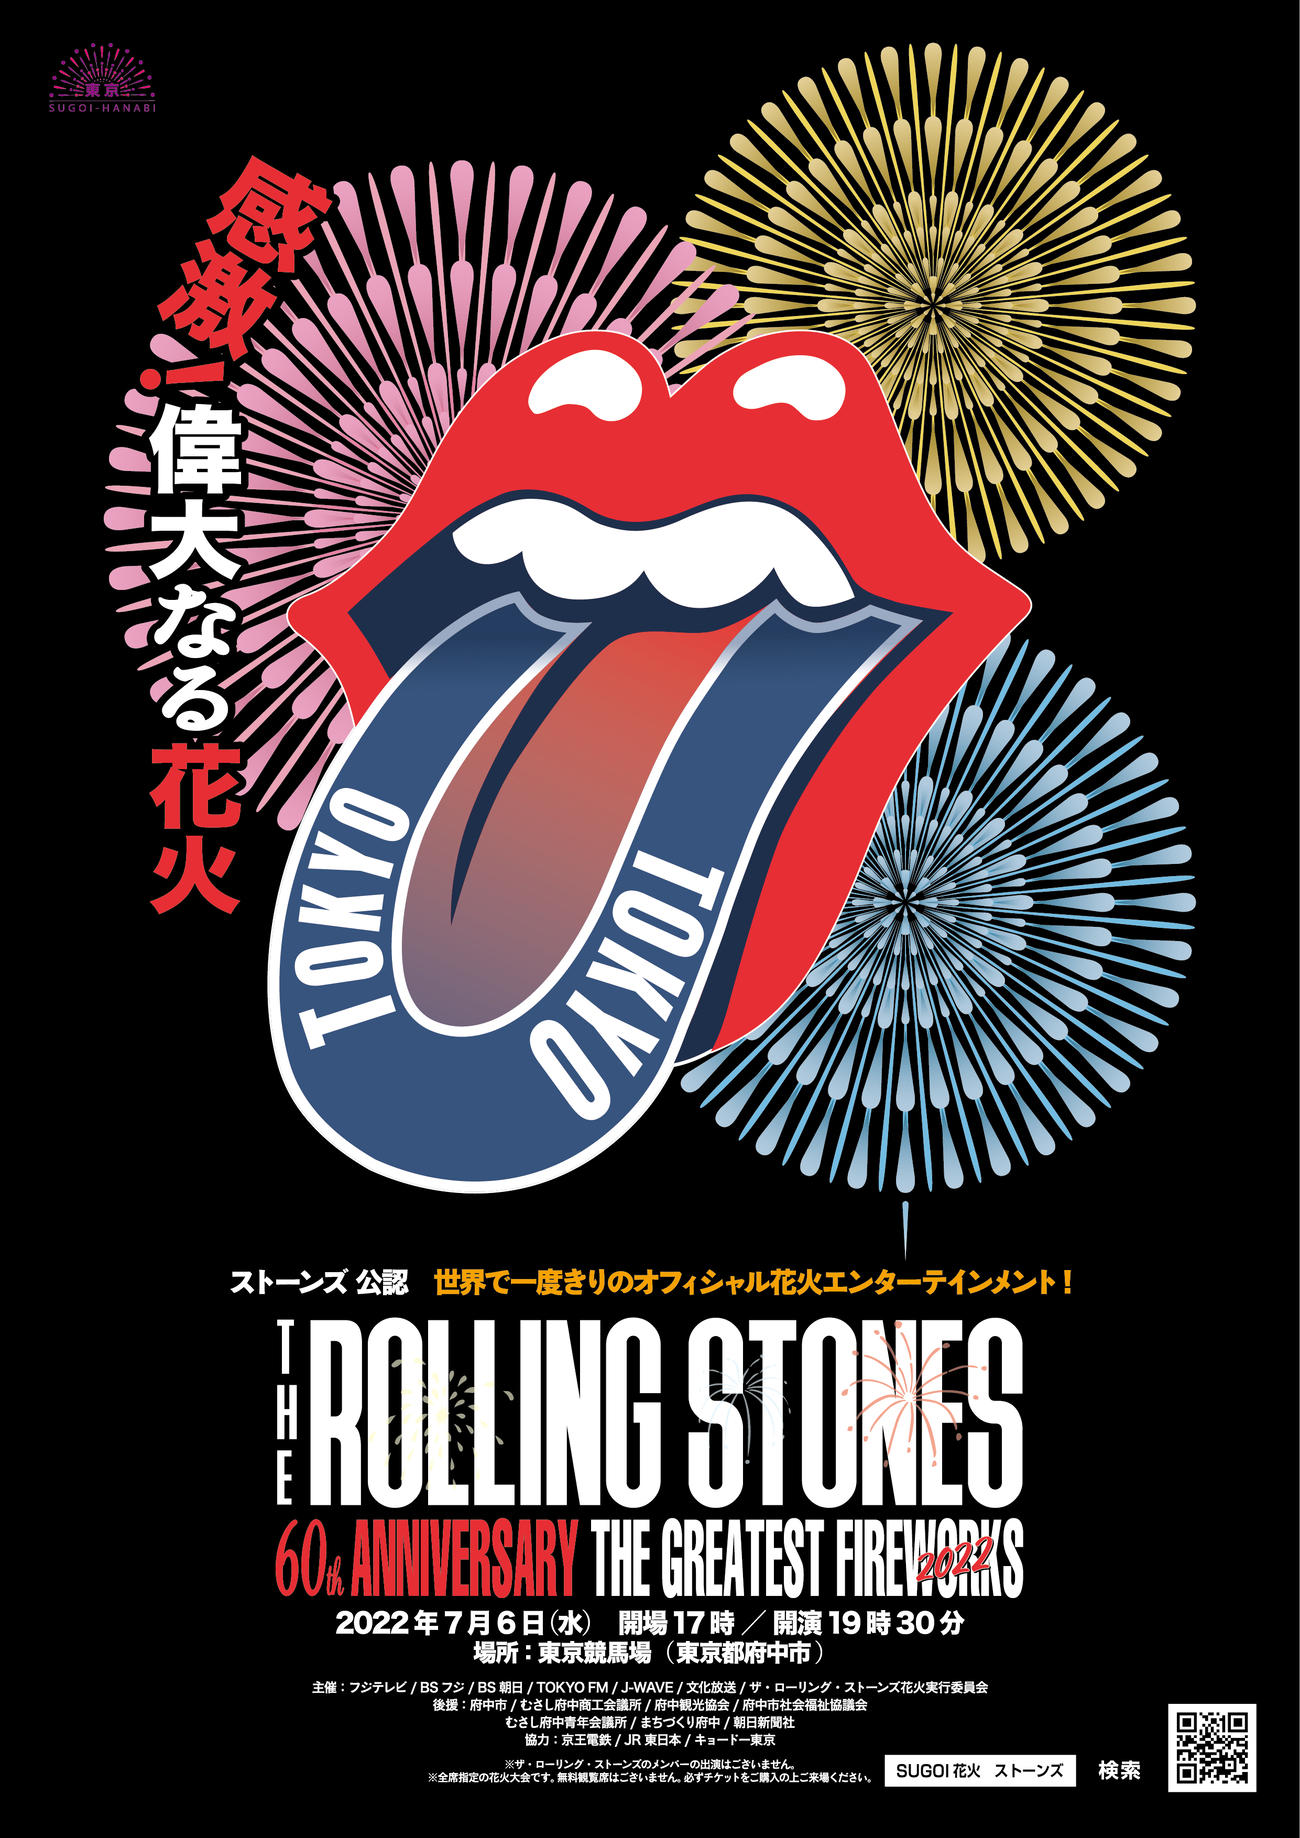 「THE ROLLING STONES 60th ANNIVERSARY THE GREATEST FIREWORKS～感激！偉大なる花火～」のポスター